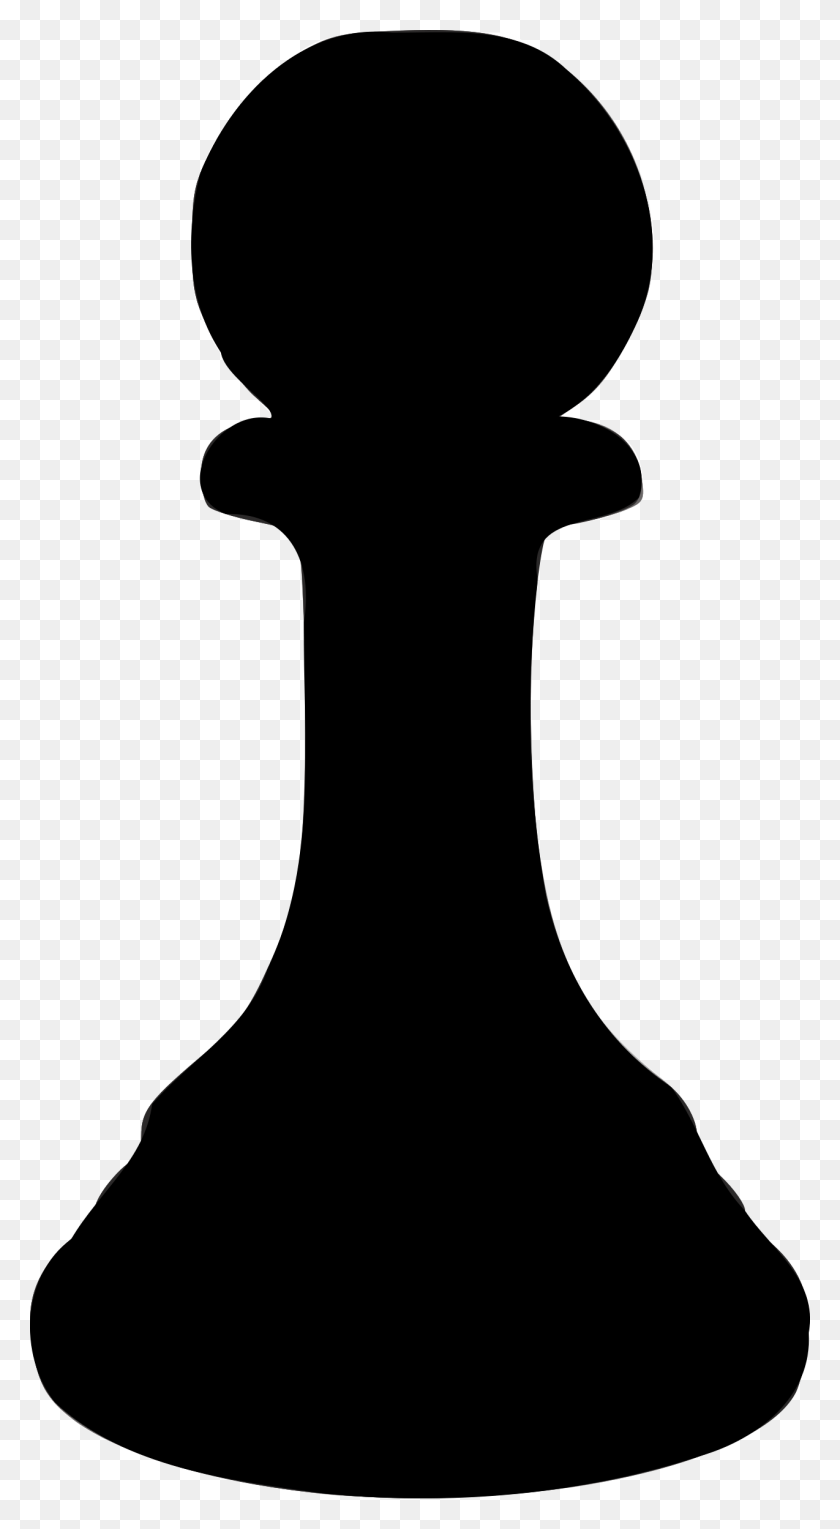 1274x2400 Chess Pawn Black Silhouette Piece Image - Pawn Clipart